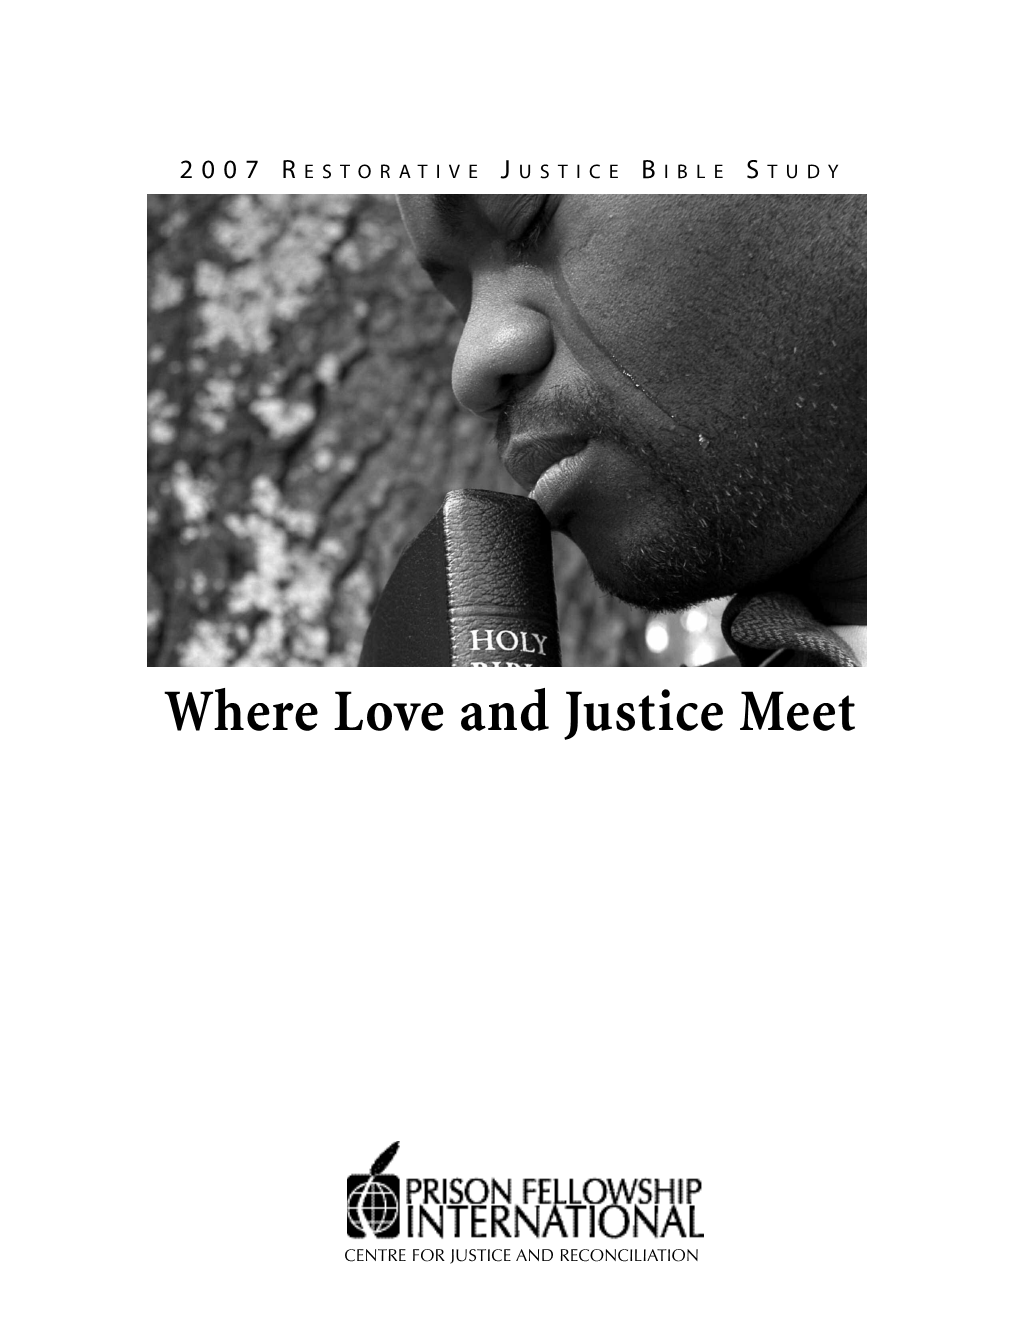 Where Love and Justice Meet